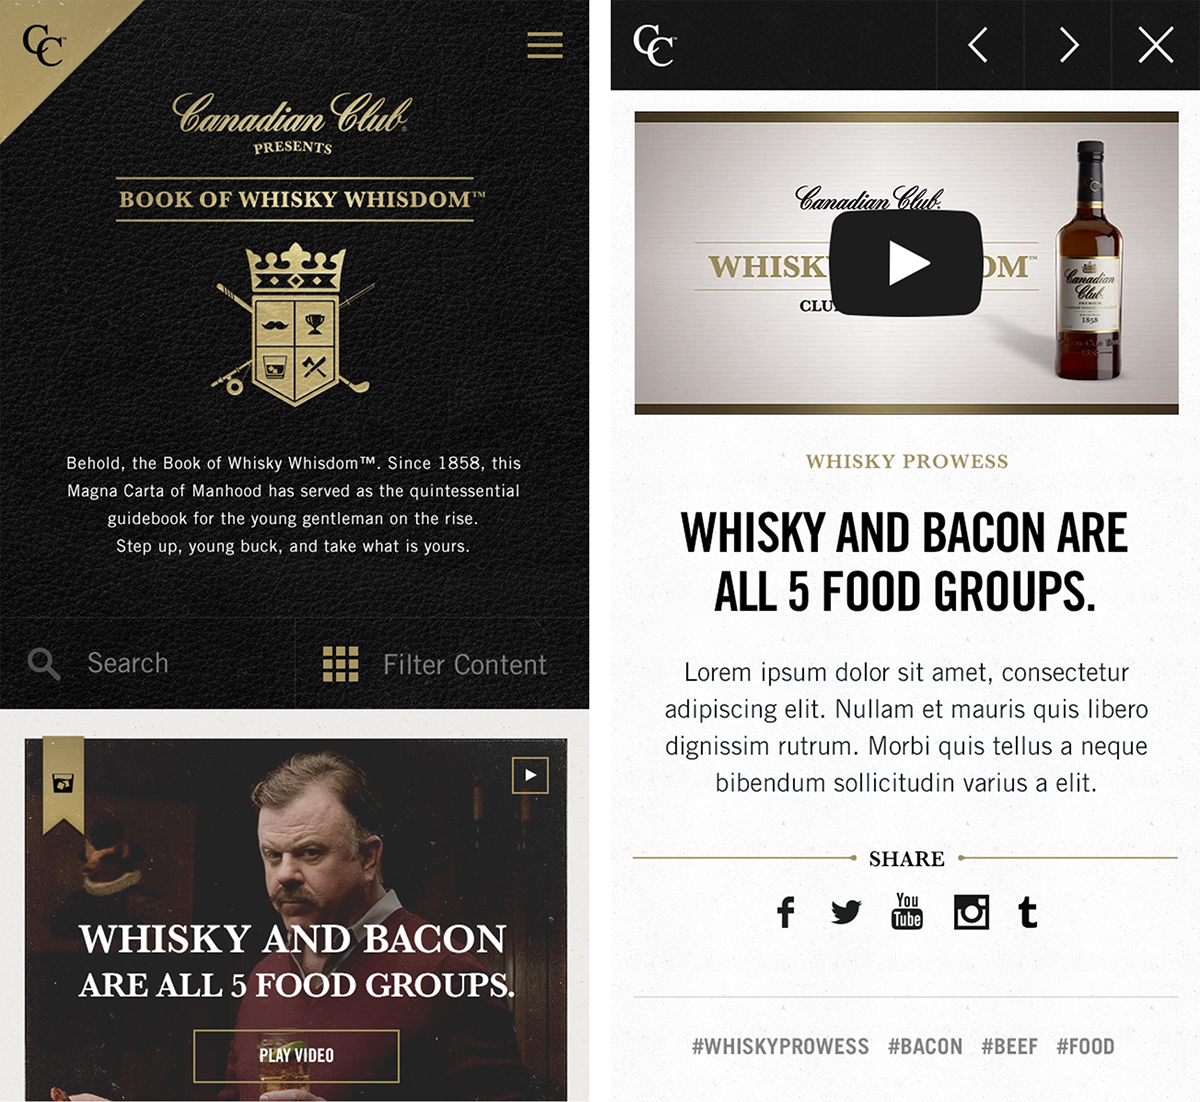 Whisky drink social feed html5 Canadian Club HYFN gold book tumblr design Website Responsive